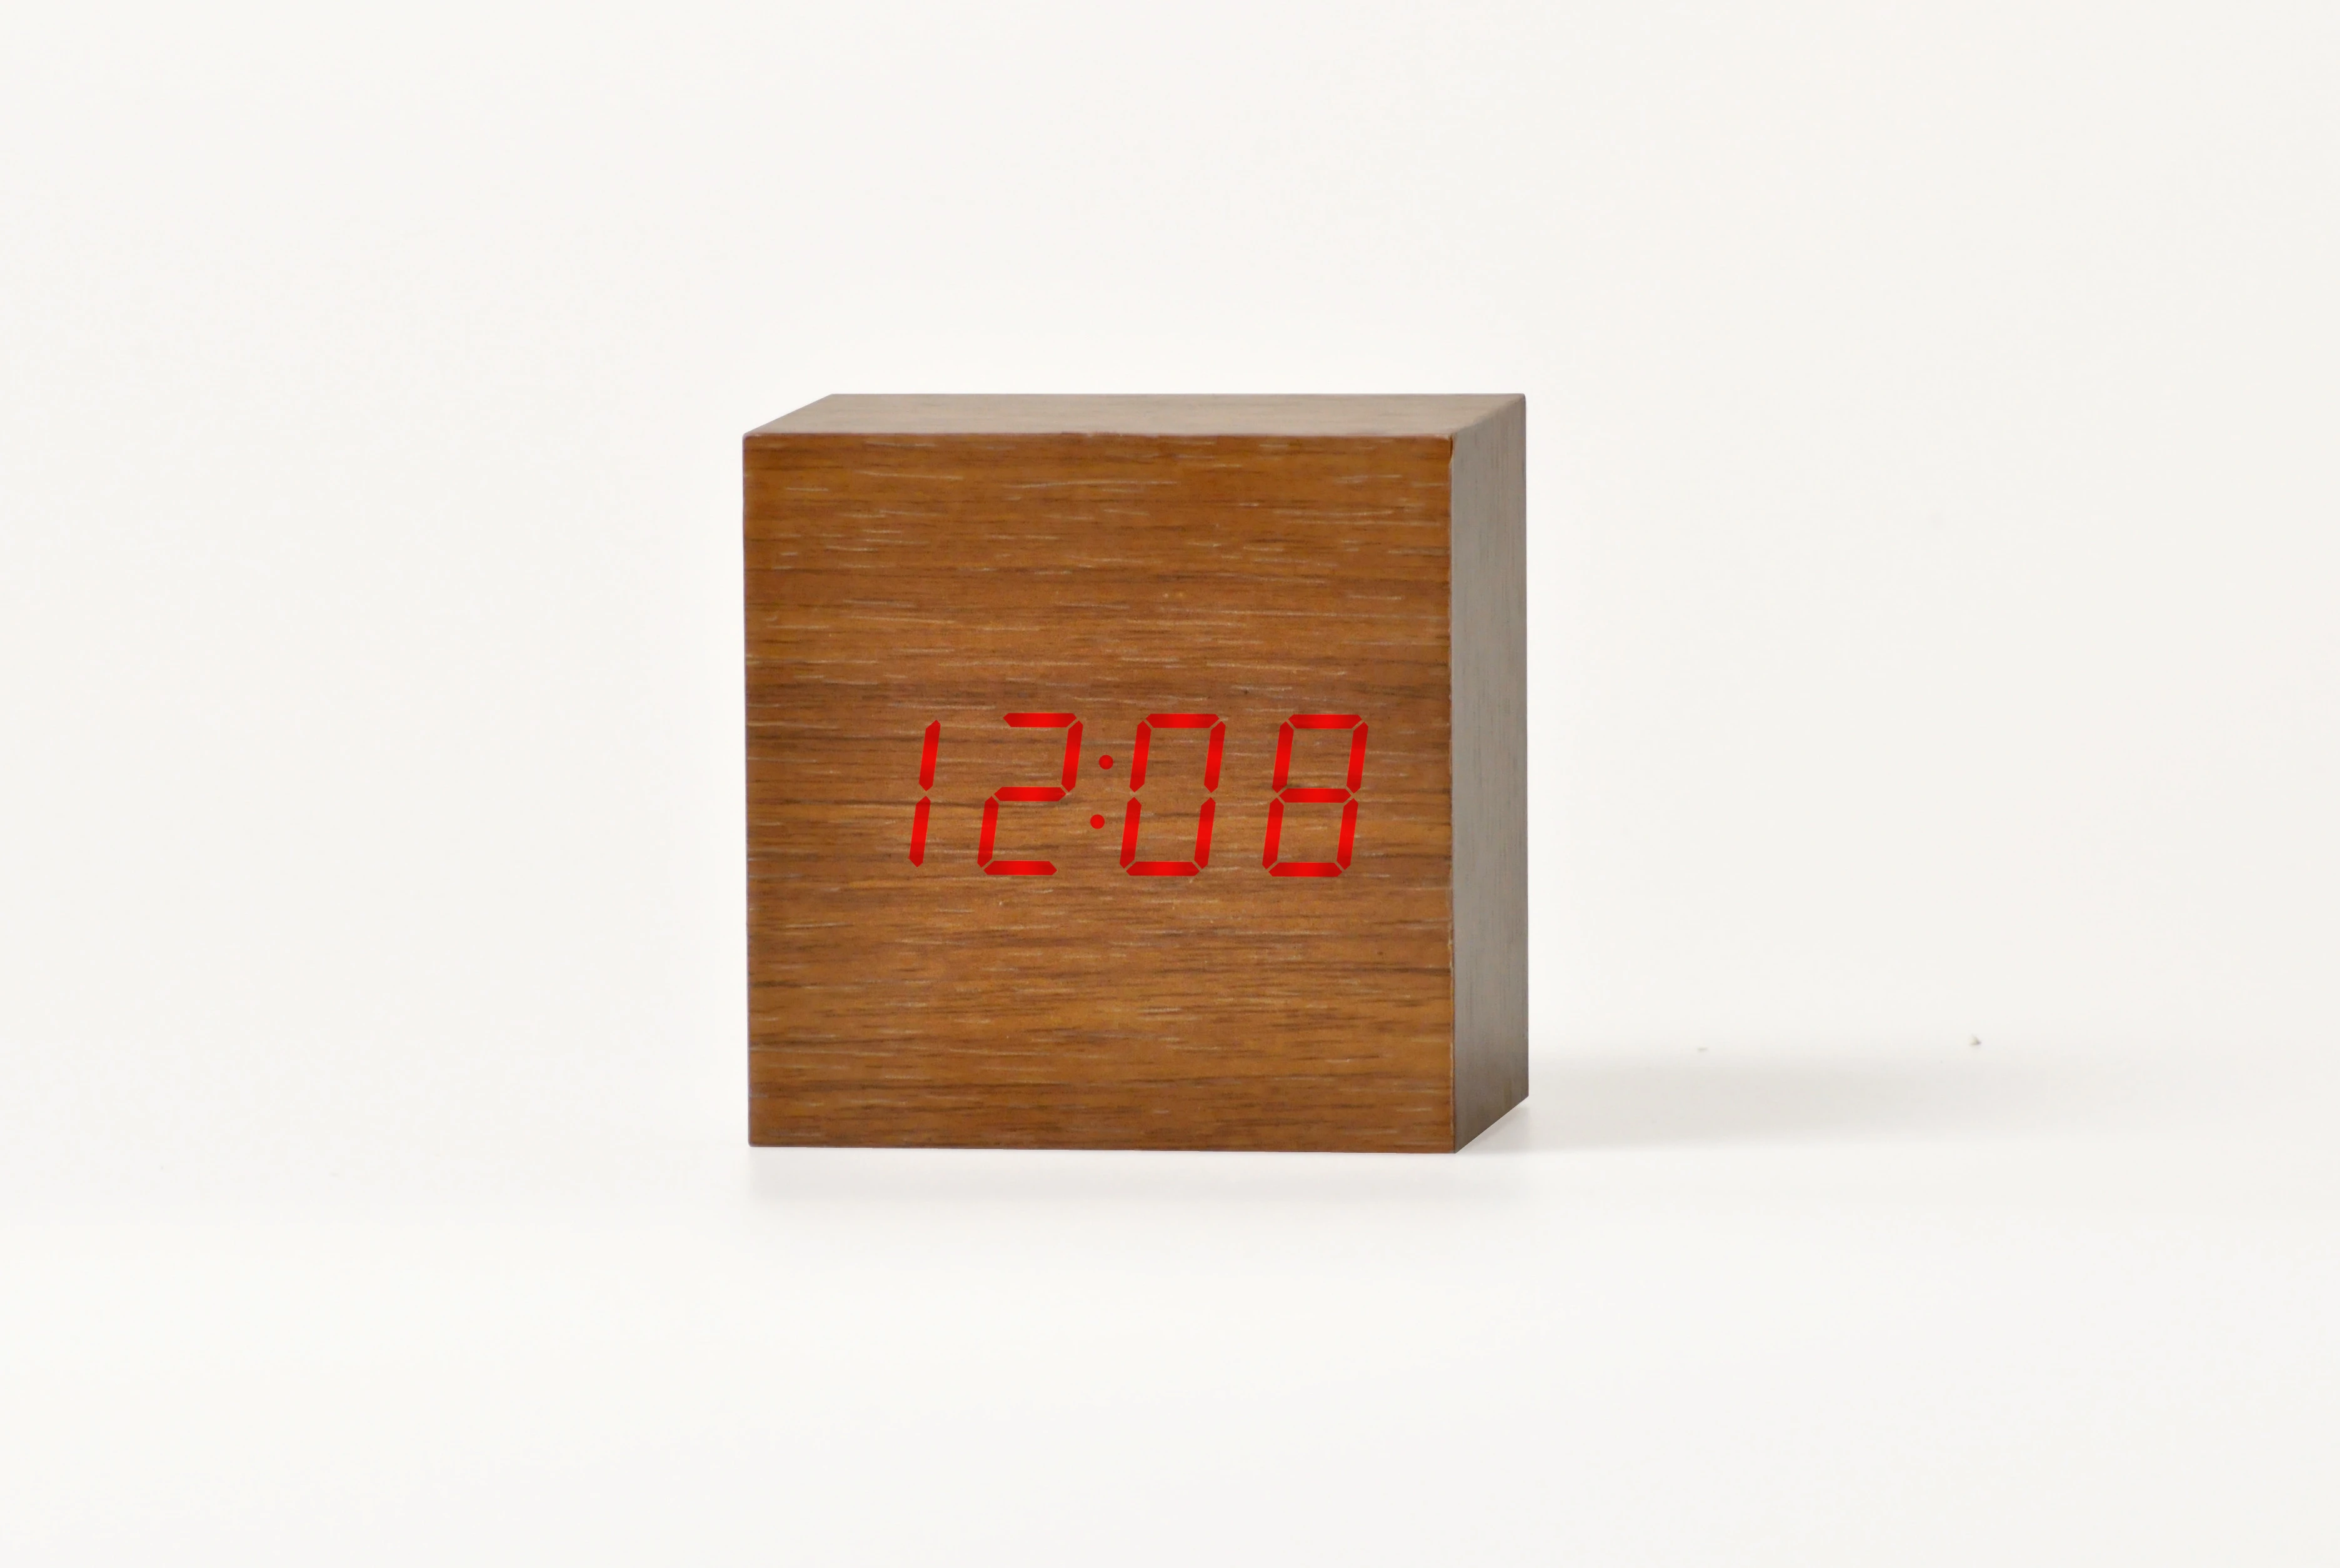 Desktop alarm clock Different Colored Fonts 3D Digital wood Thermometer Temperature Time Date Roller Play Wooden clock